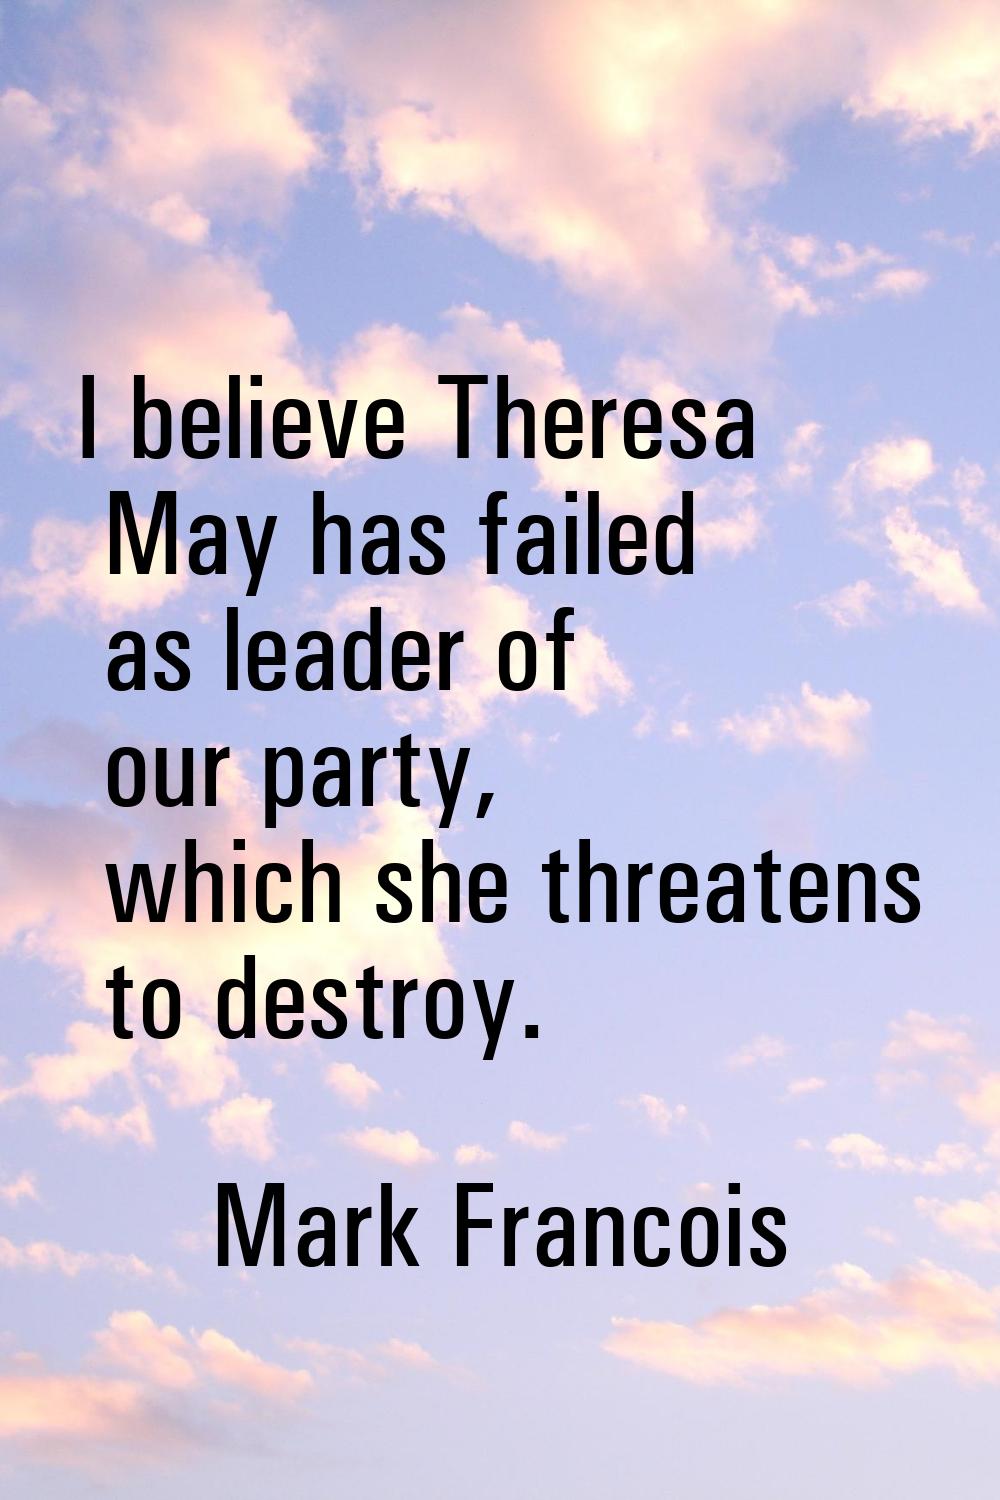 I believe Theresa May has failed as leader of our party, which she threatens to destroy.